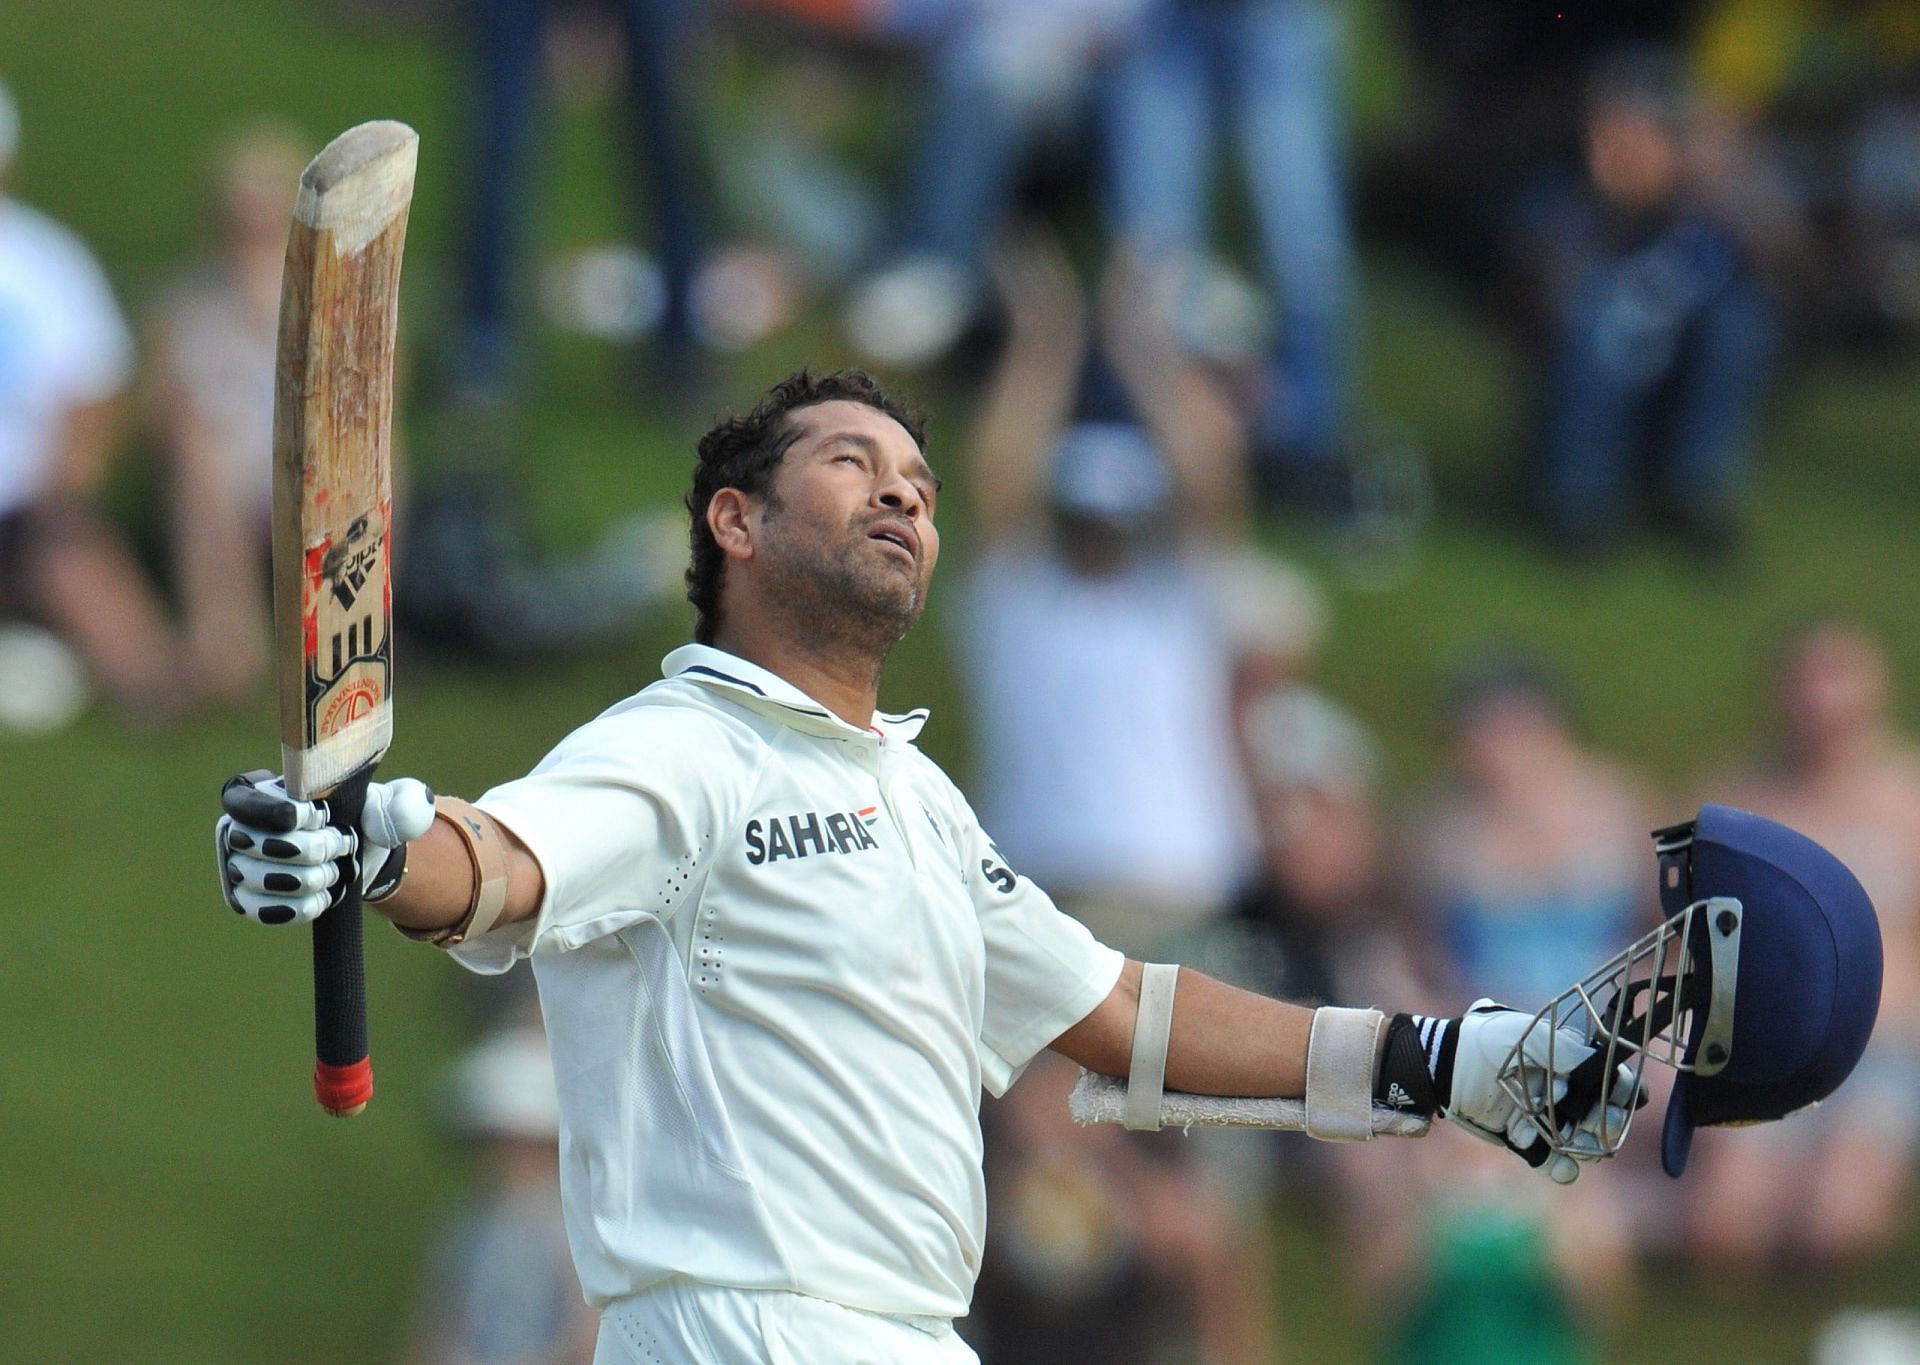 Sachin Tendulkar celebrates his 50th Test century on Day 4 of the Centurion Test in 2010. Pic: Getty Images